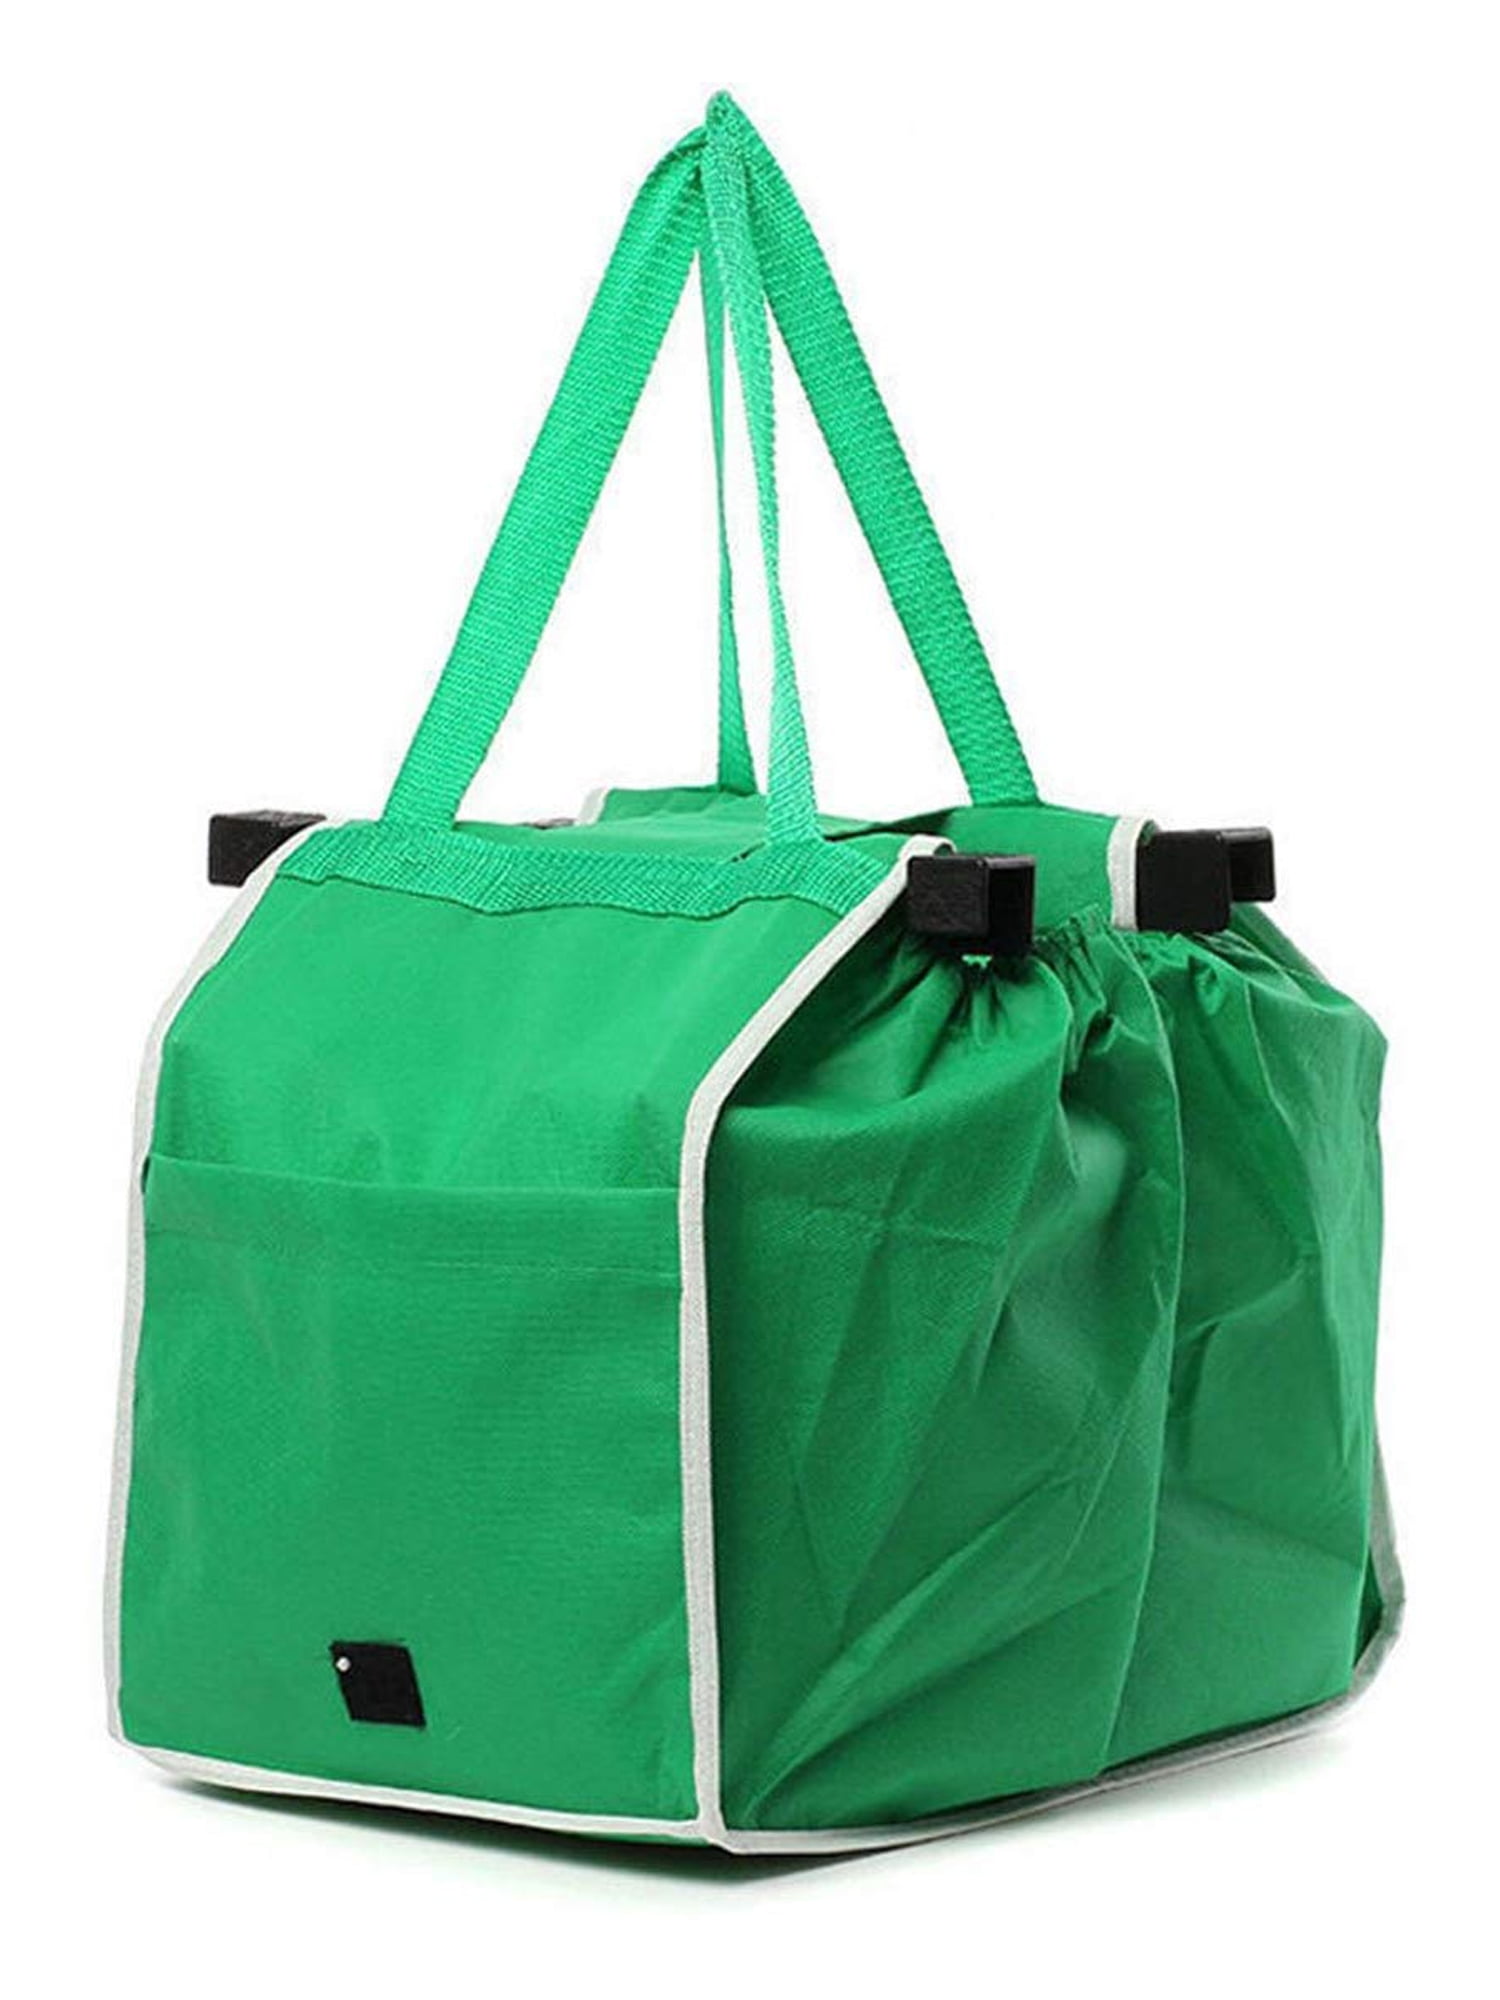 Folding Reusable Tote Bags Grocery Fabric Shopping Carrier Clip-To-Cart Trolley 